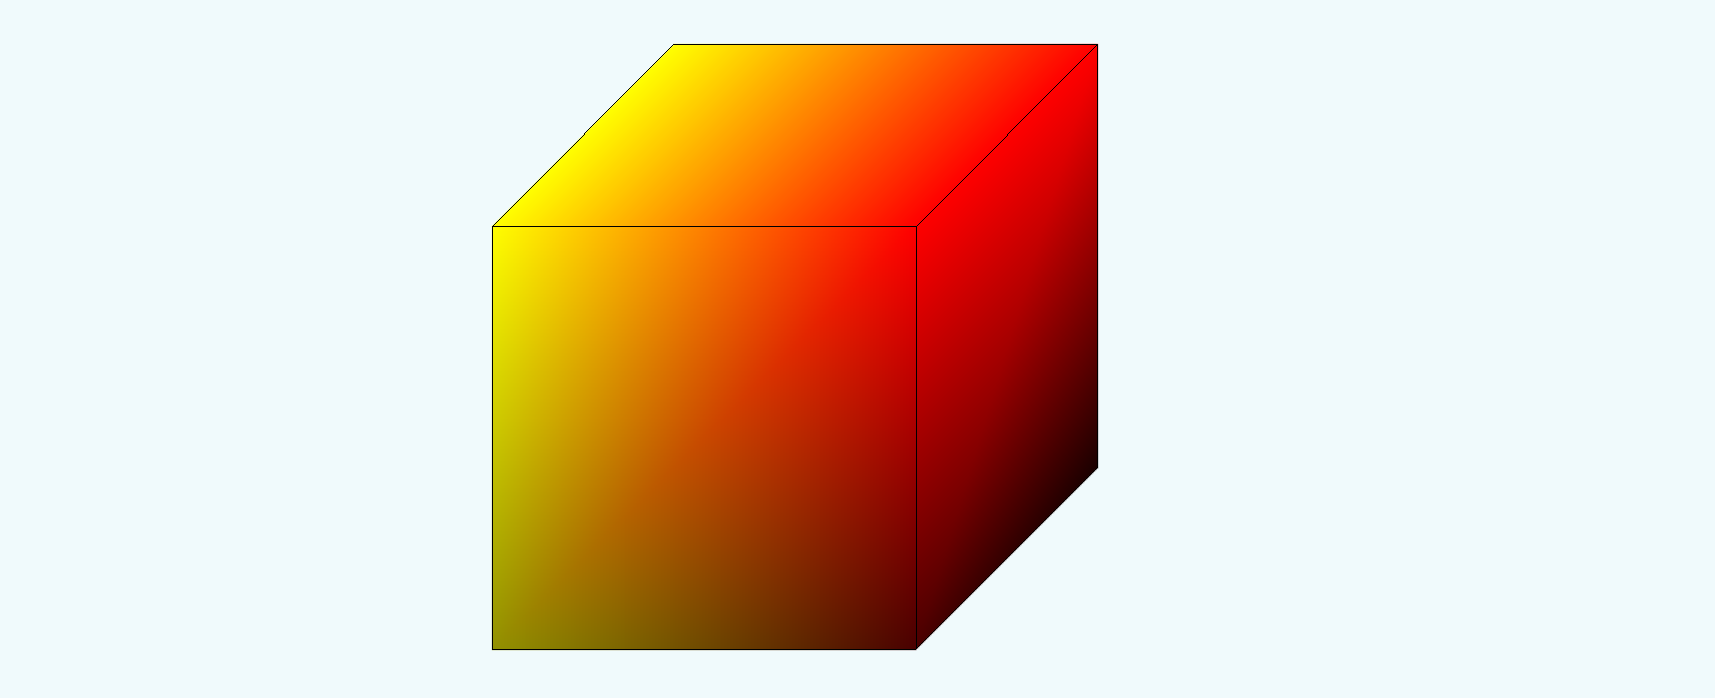 A cube that transitions from yellow to red smoothly left to right.